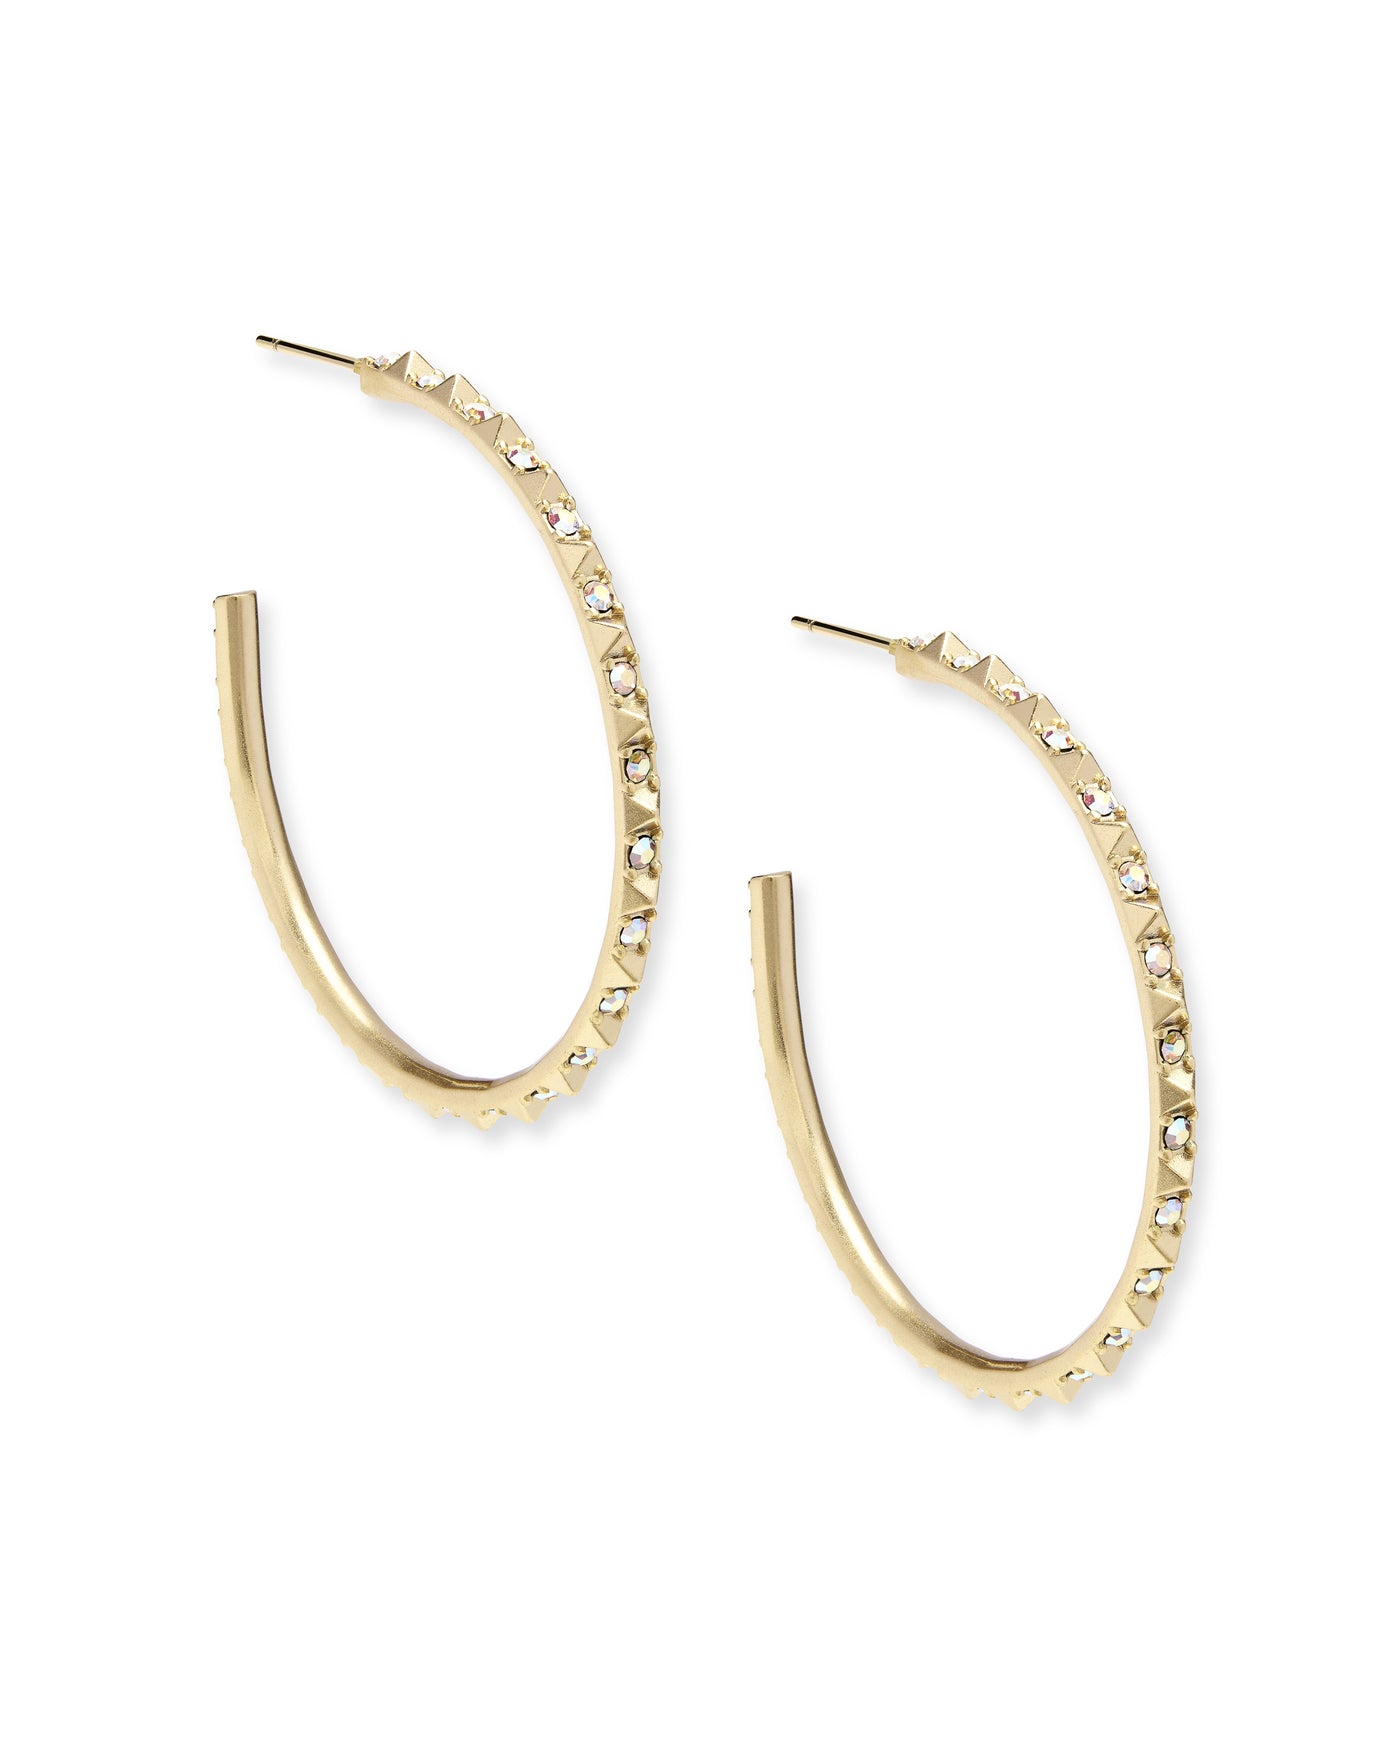 Kendra Scott Veronica Hoop Earrings in Gold Iridescent Crystal-Earrings-Kendra Scott-Market Street Nest, Fashionable Clothing, Shoes and Home Décor Located in Mabank, TX